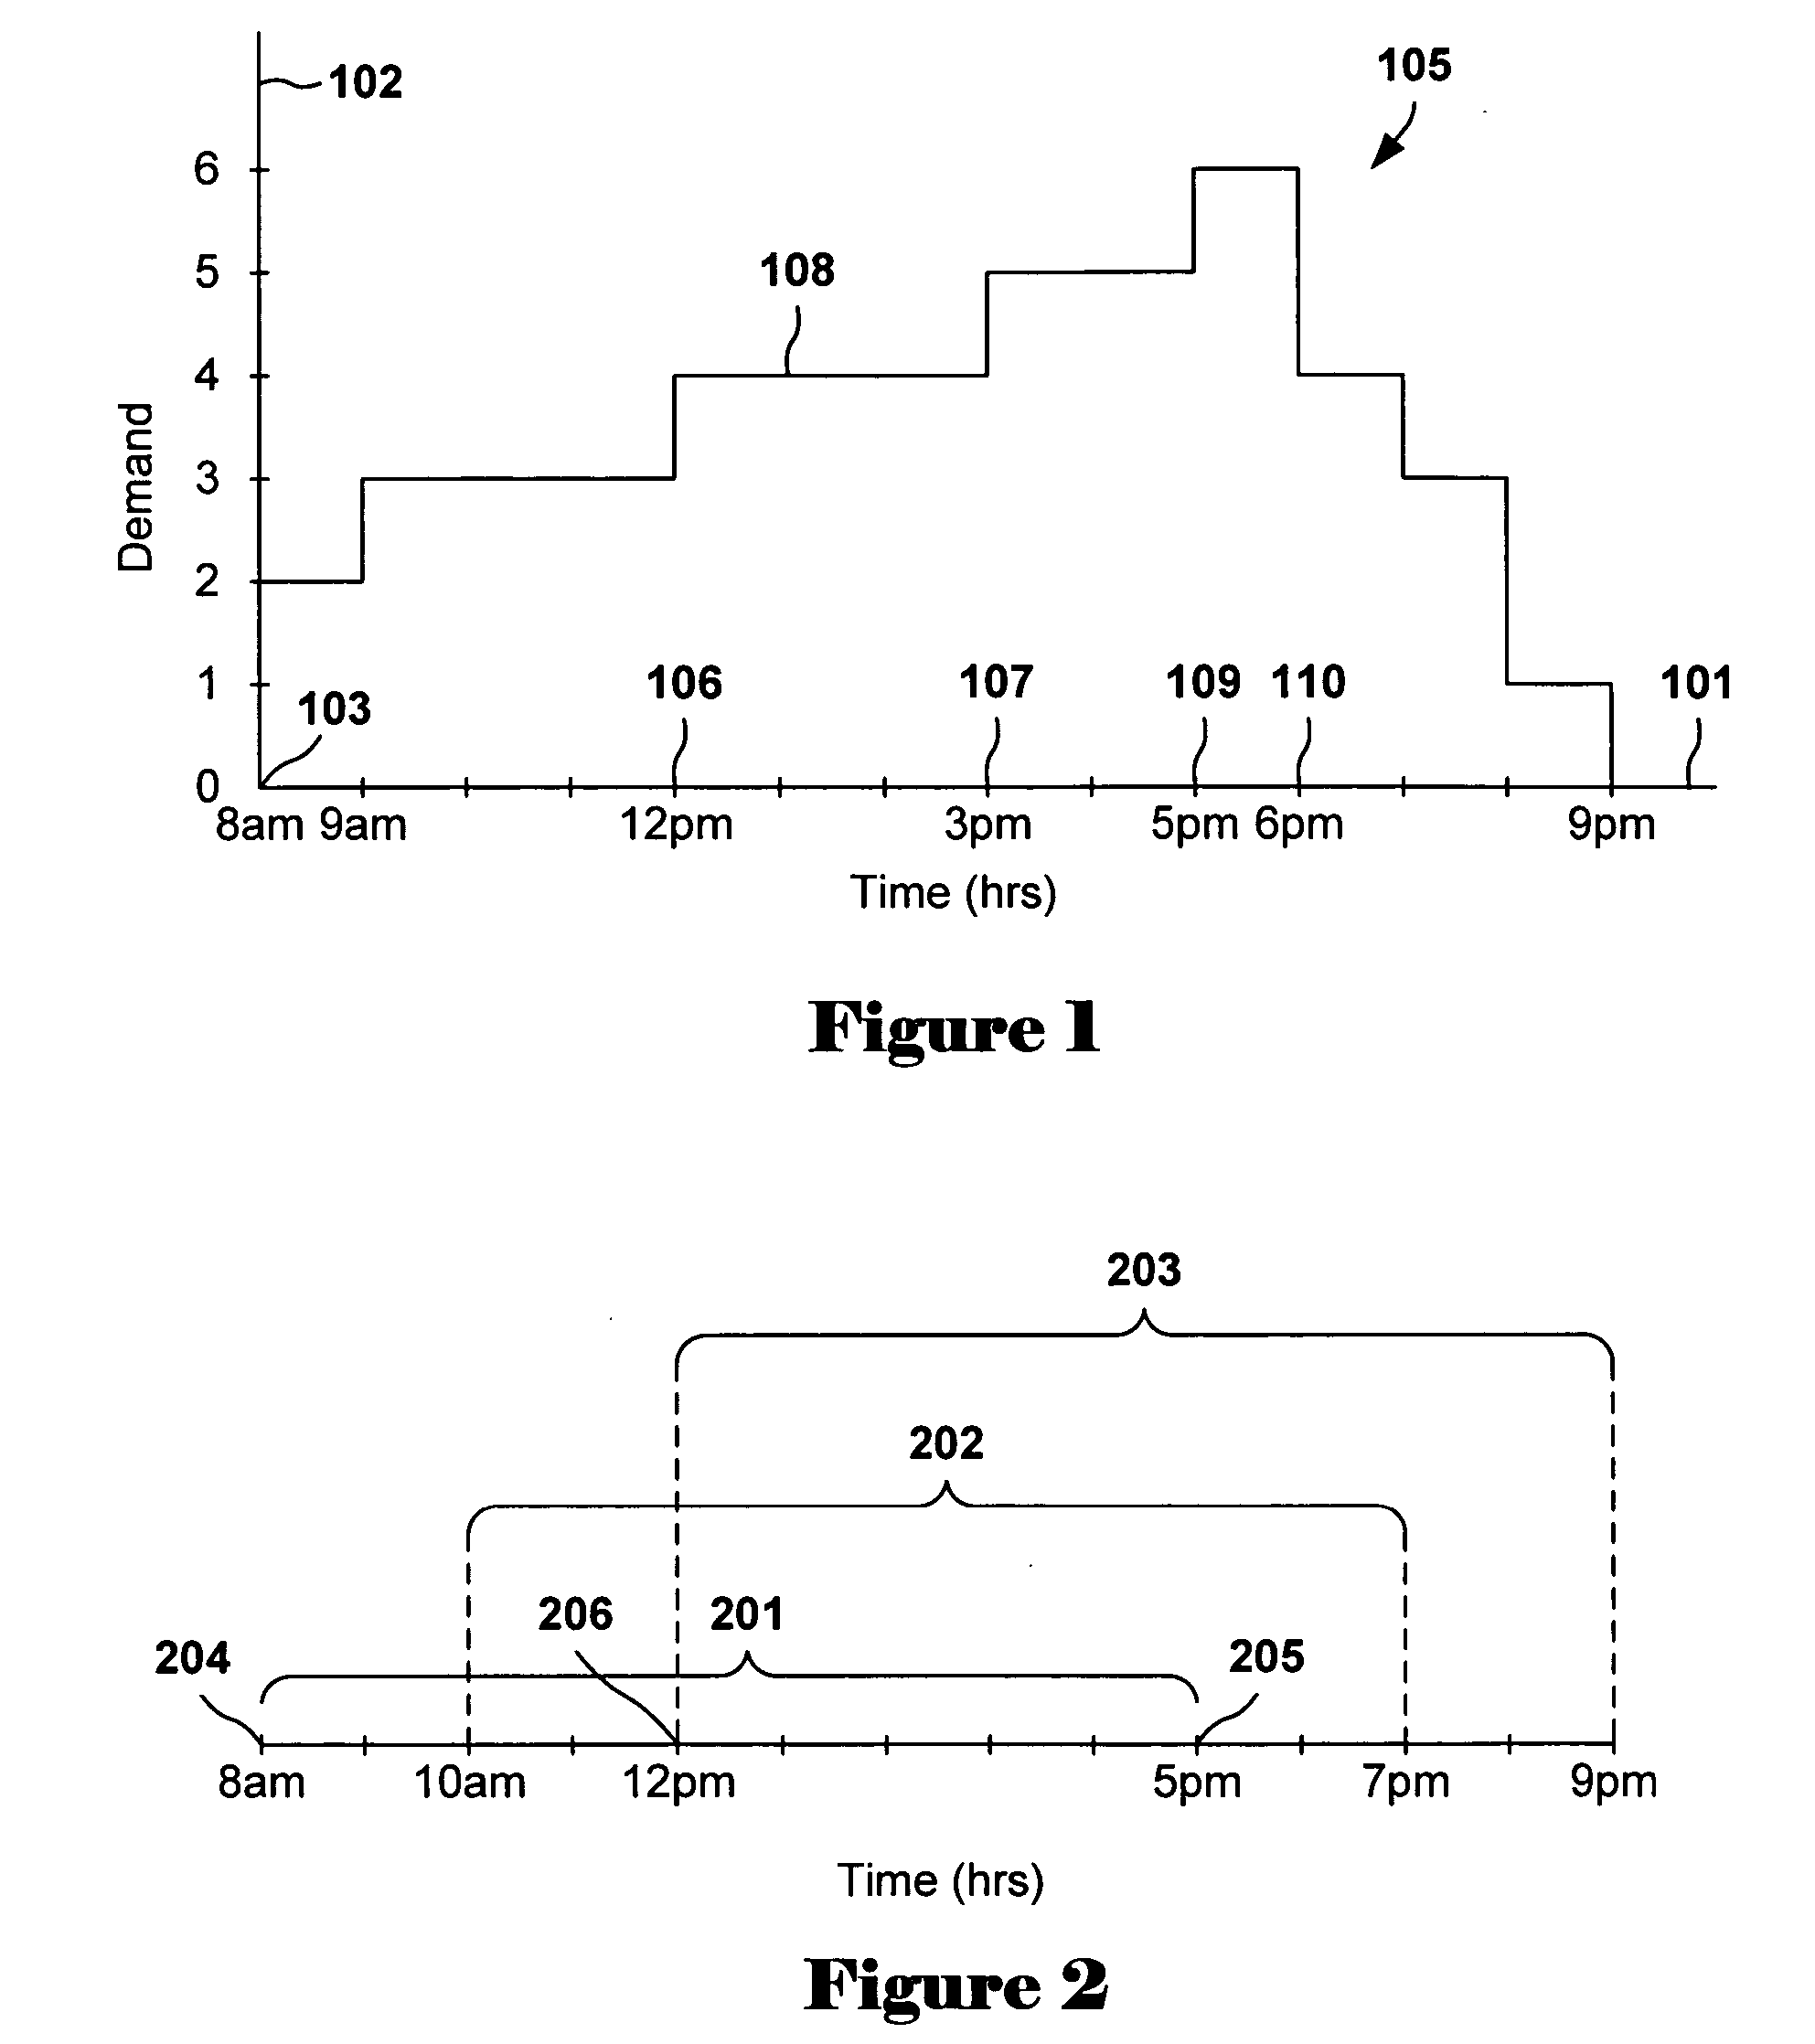 Method and system for determining a near optimal resource schedule